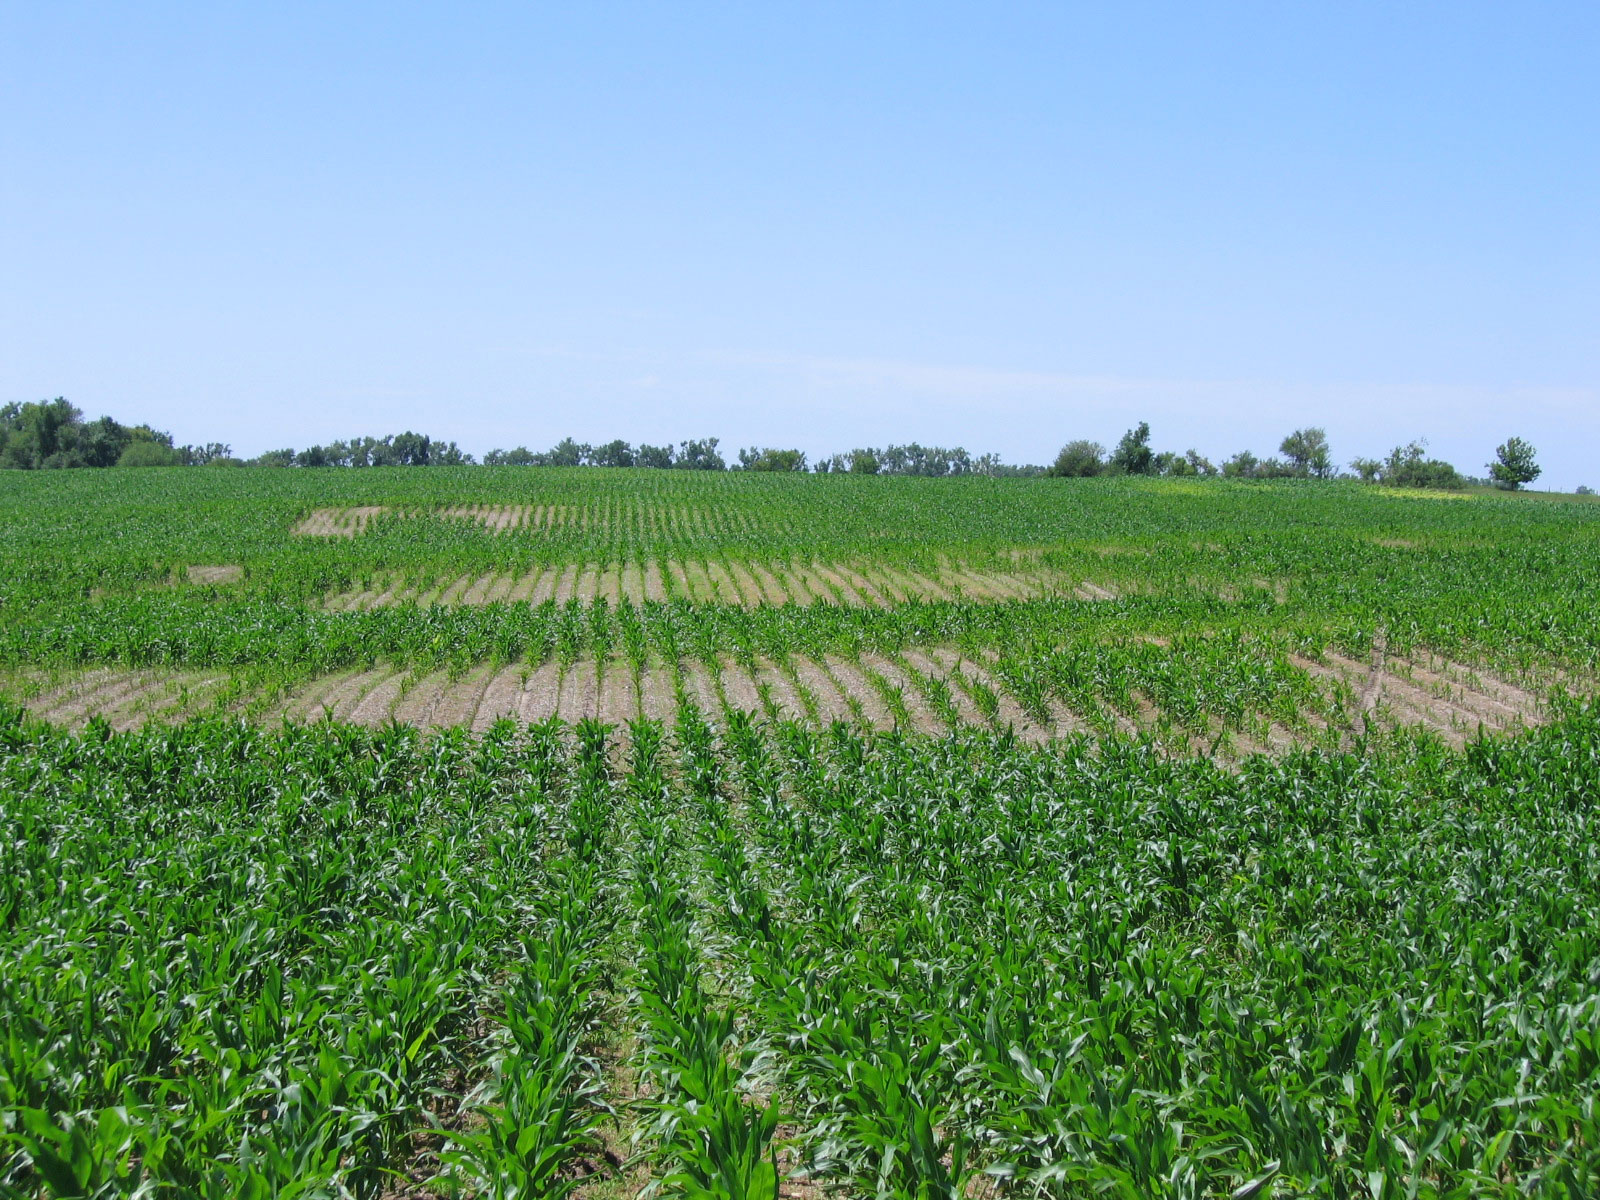 Is it Cost-effective to Apply Nematicides to Field Corn?